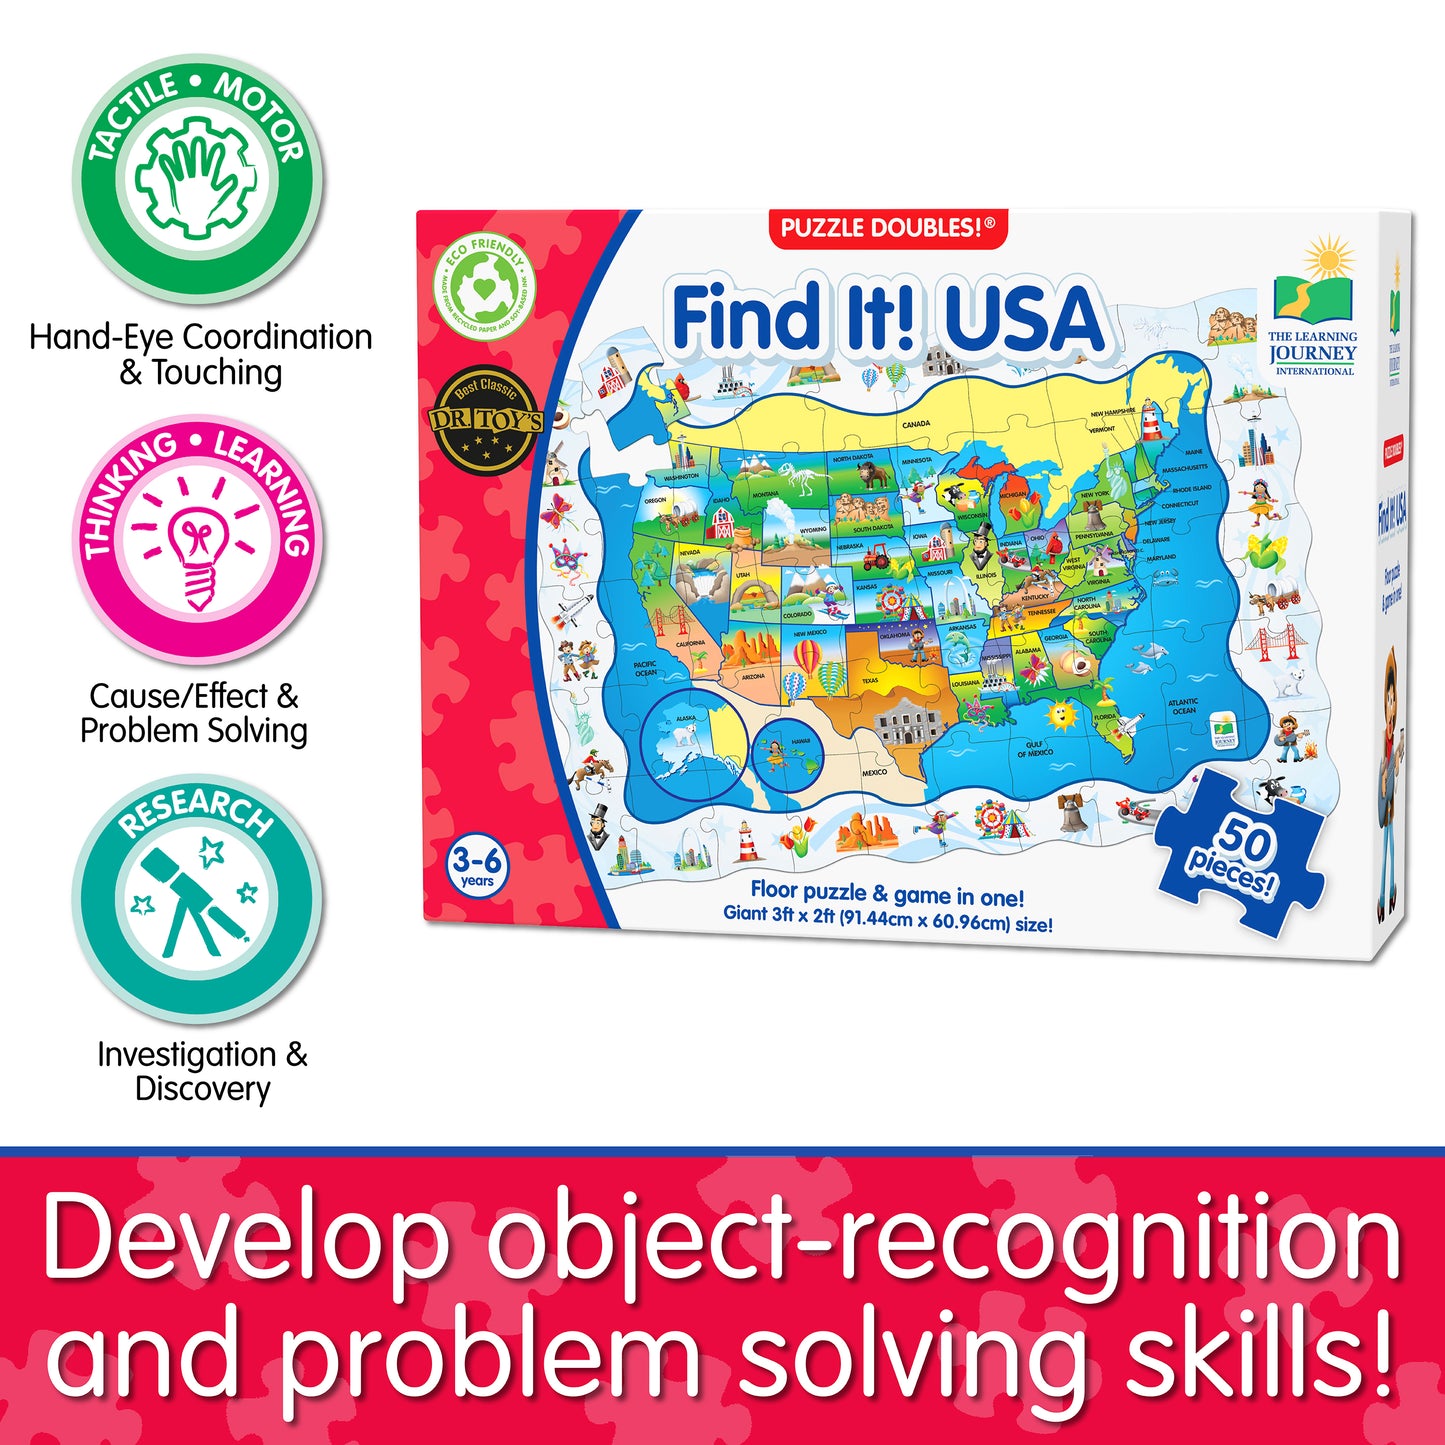 Infographic about Find It - USA's educational benefits that says, "Develop object-recognition and problem solving skills!"